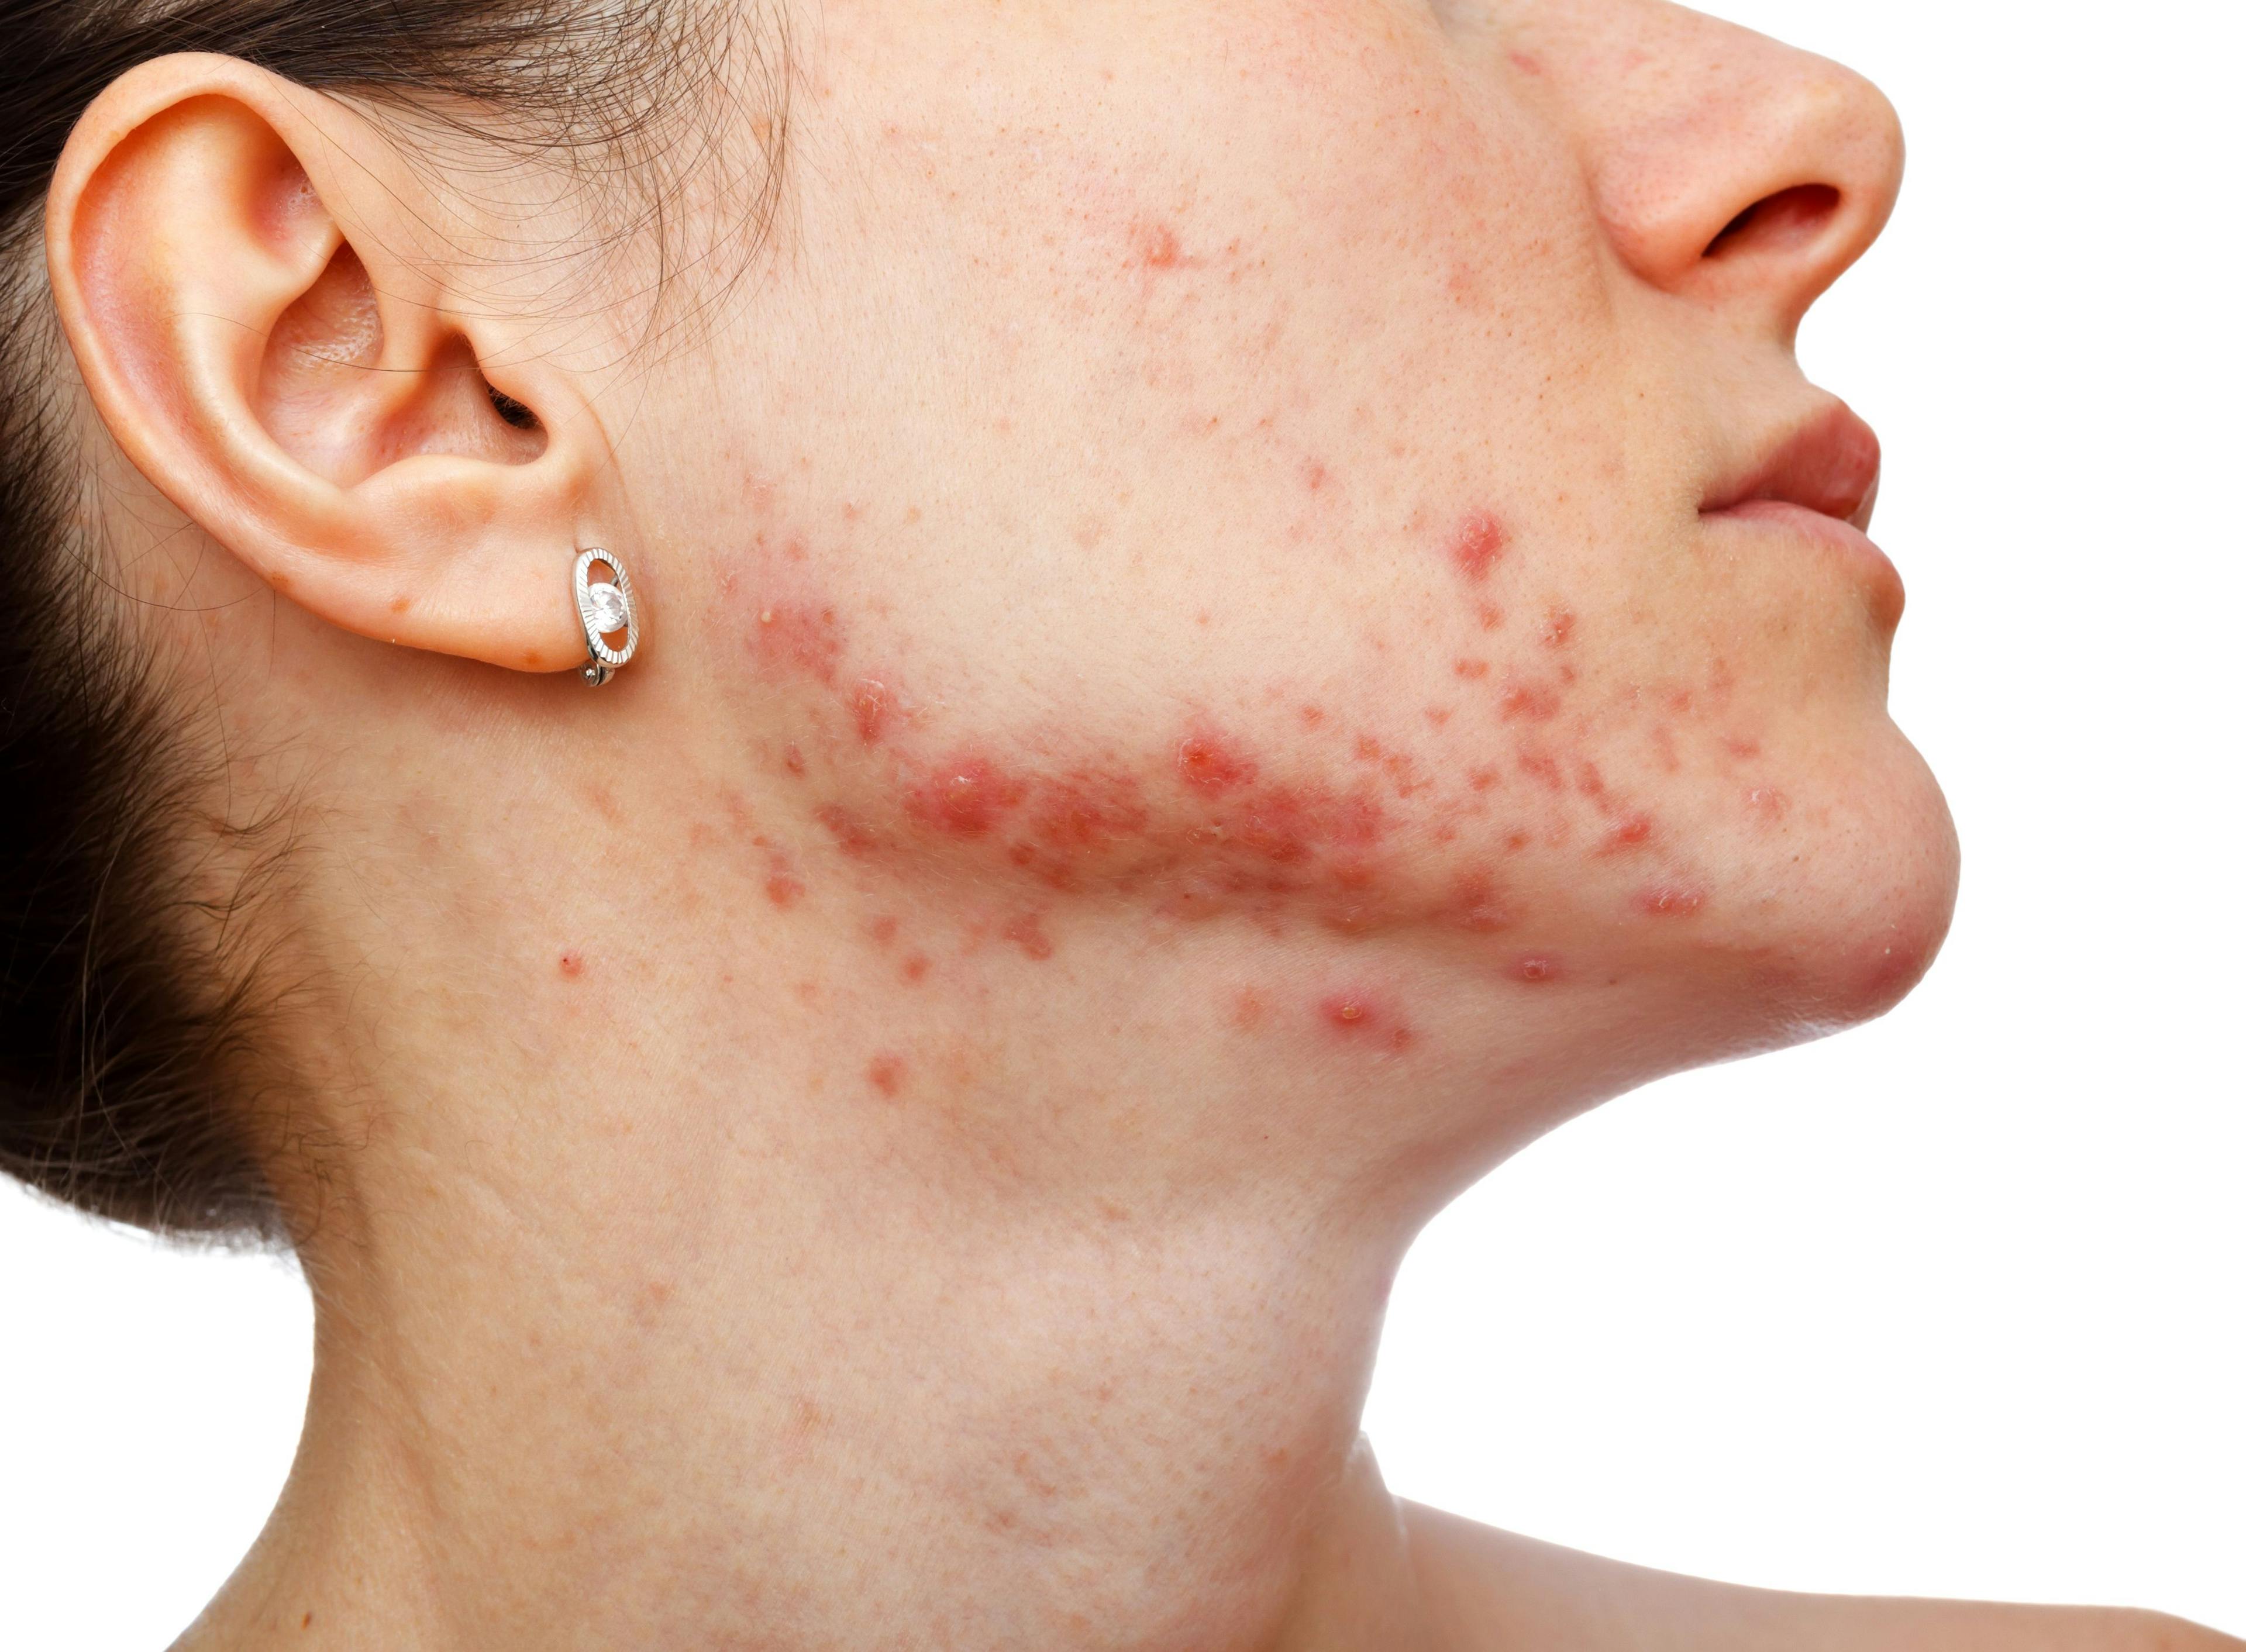 Can Stress Cause Acne?